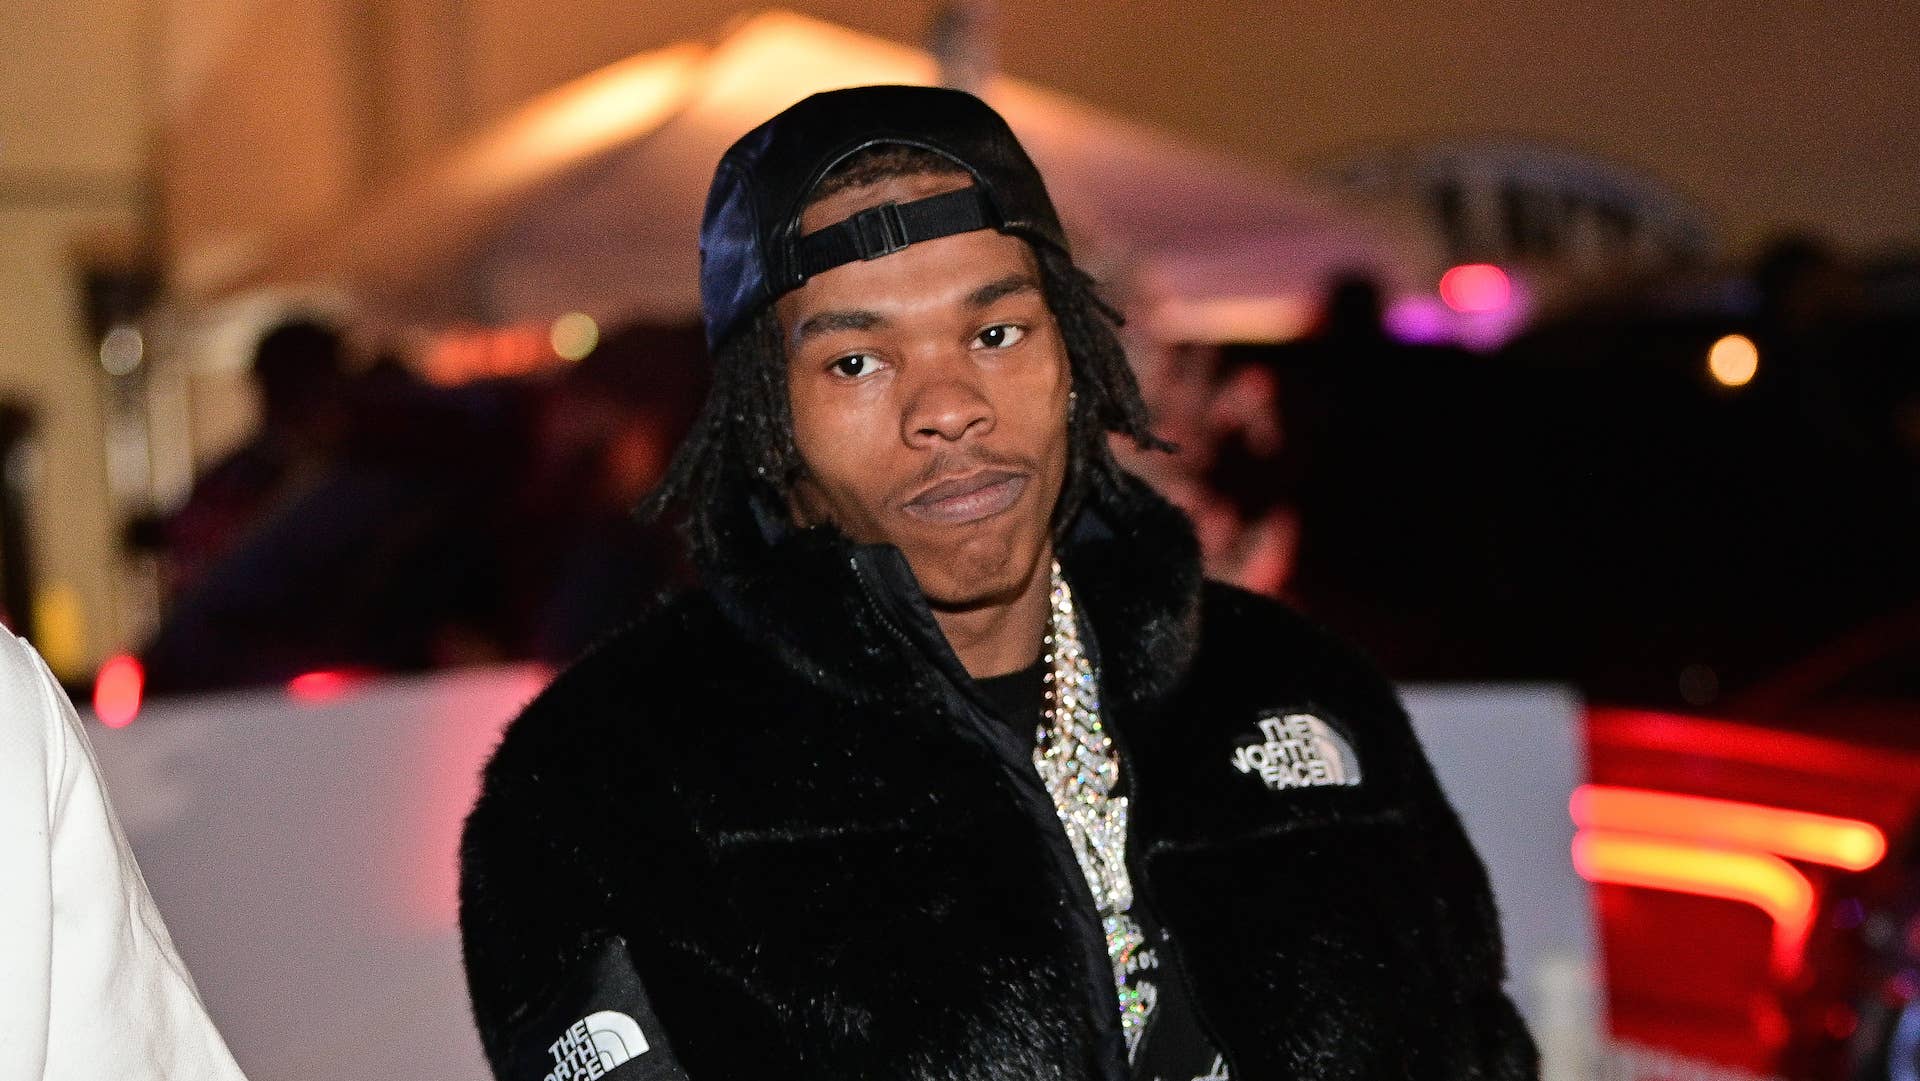 Lil Baby Wants a Basketball Rematch With Jack Harlow and Quavo